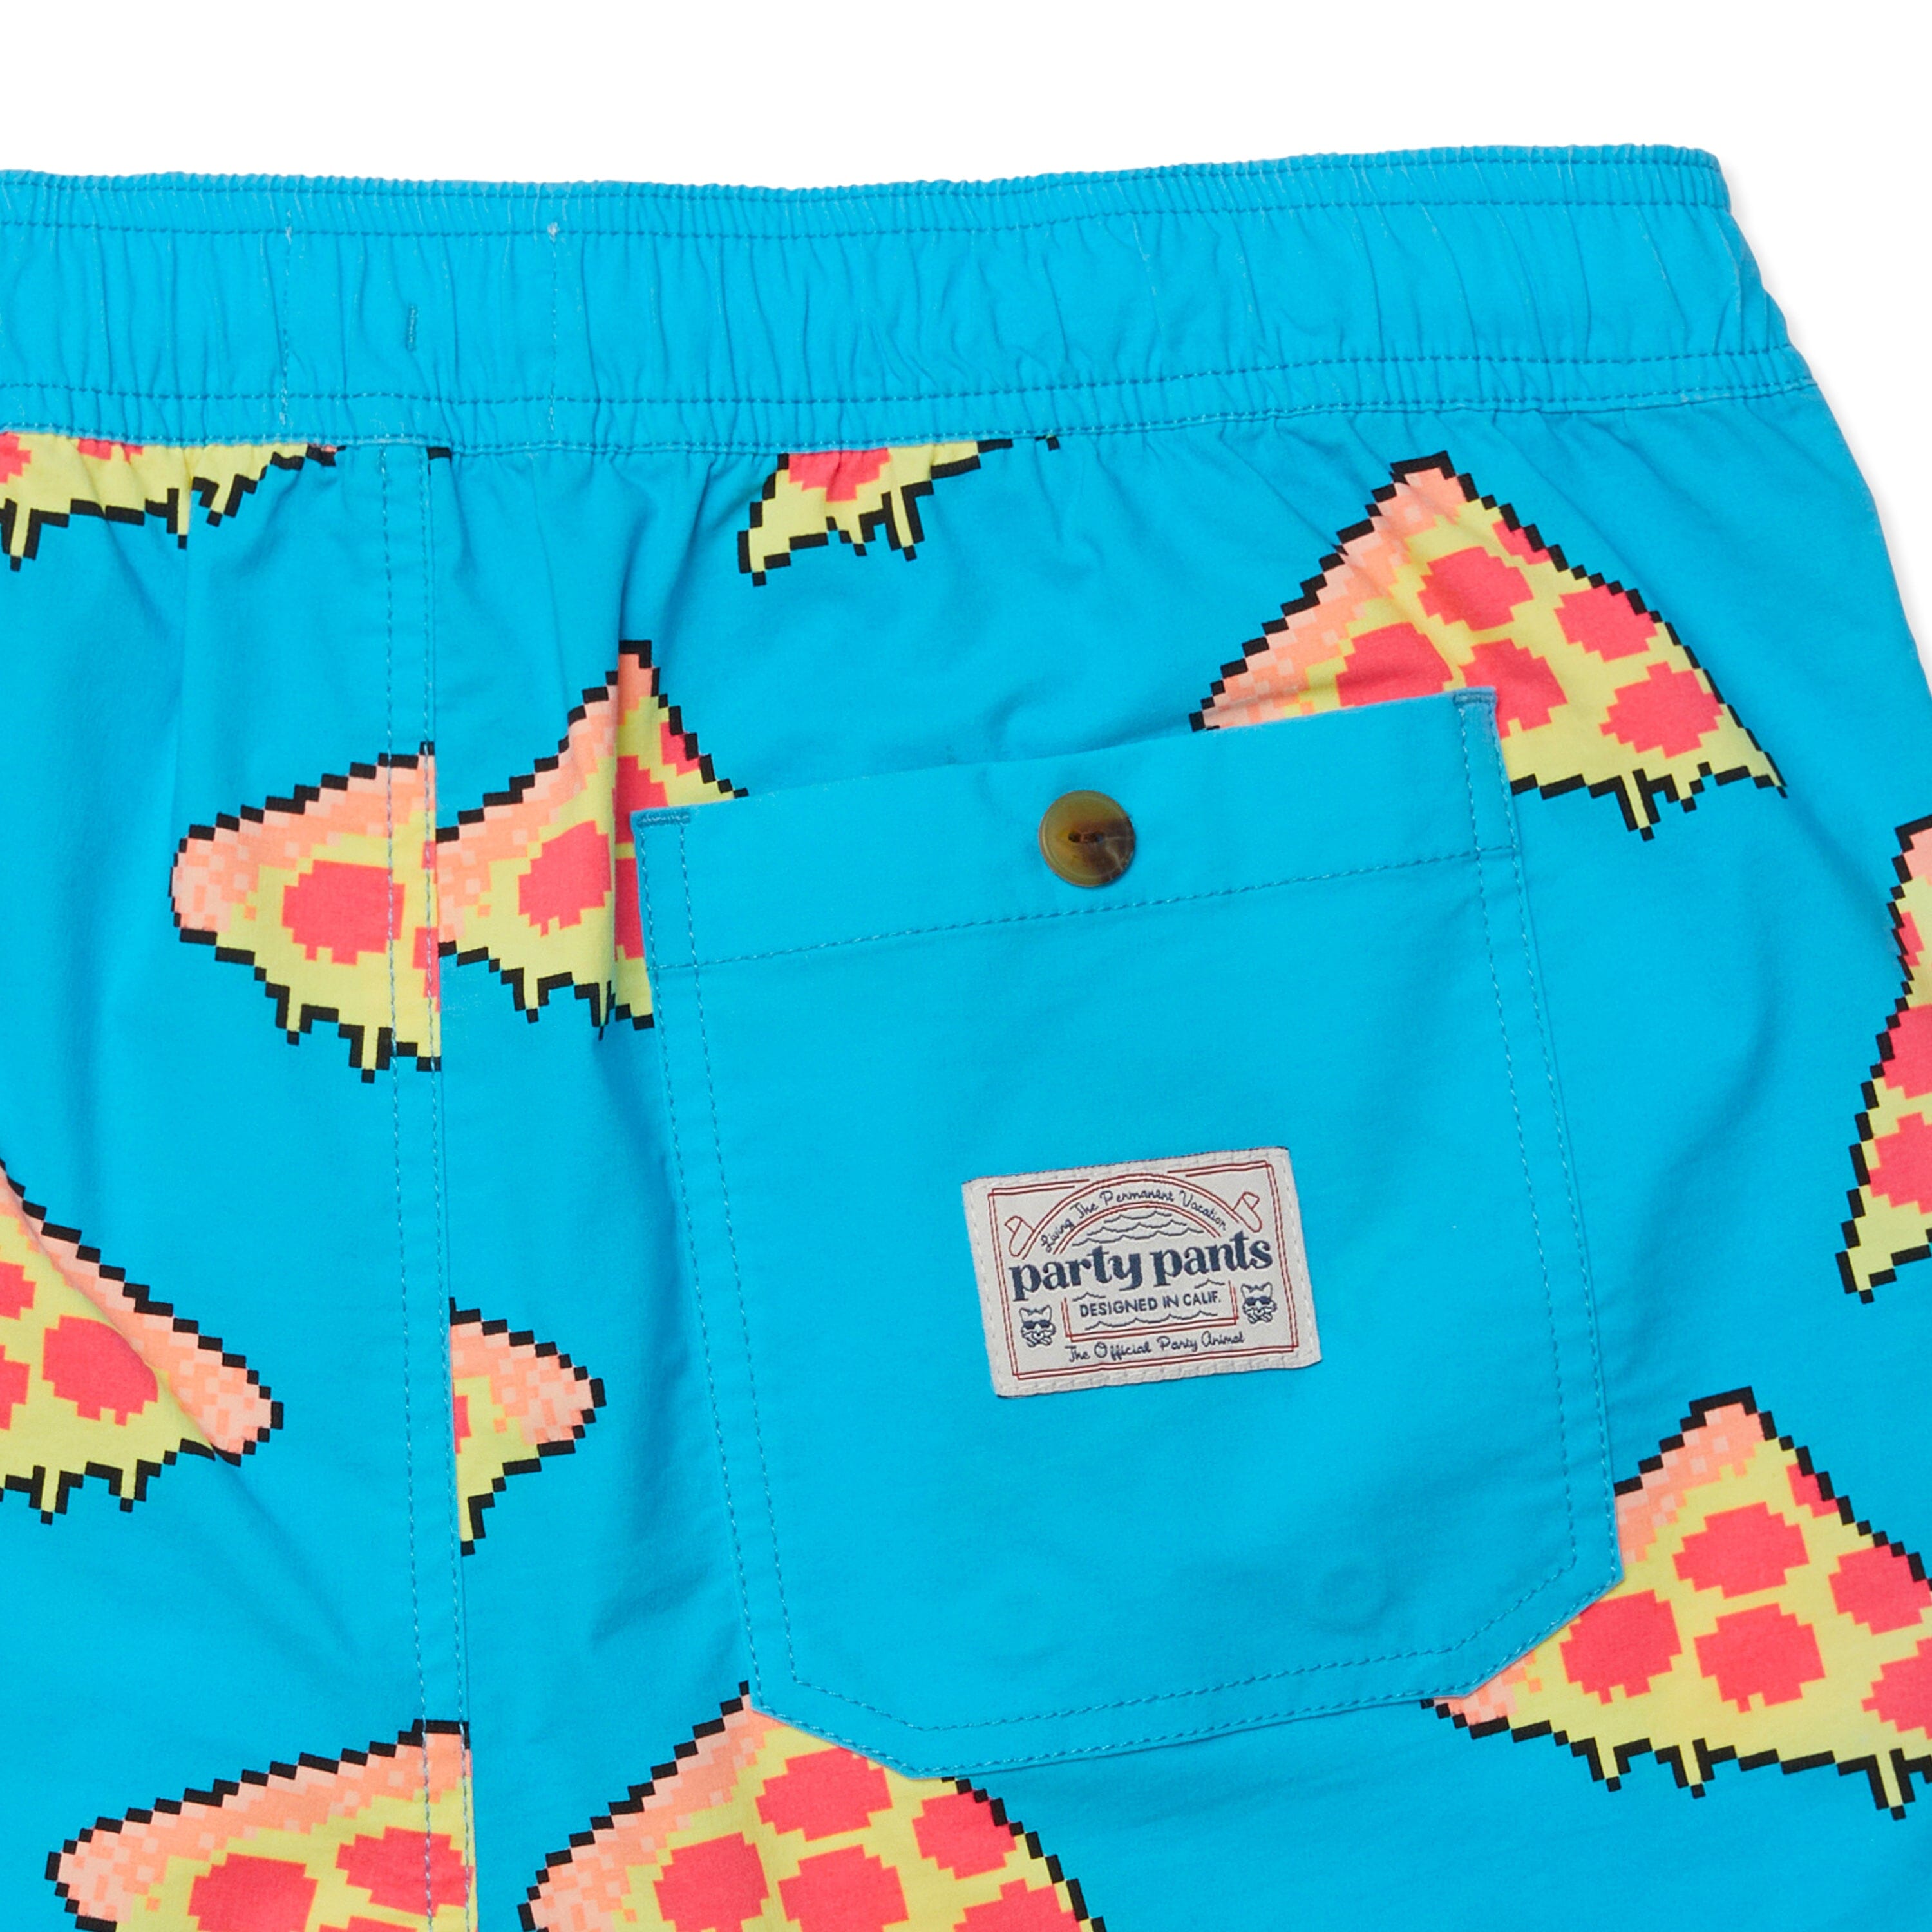 BAKED PARTY STARTER SHORT - BLUE PRINTED SHORTS PARTY PANTS 